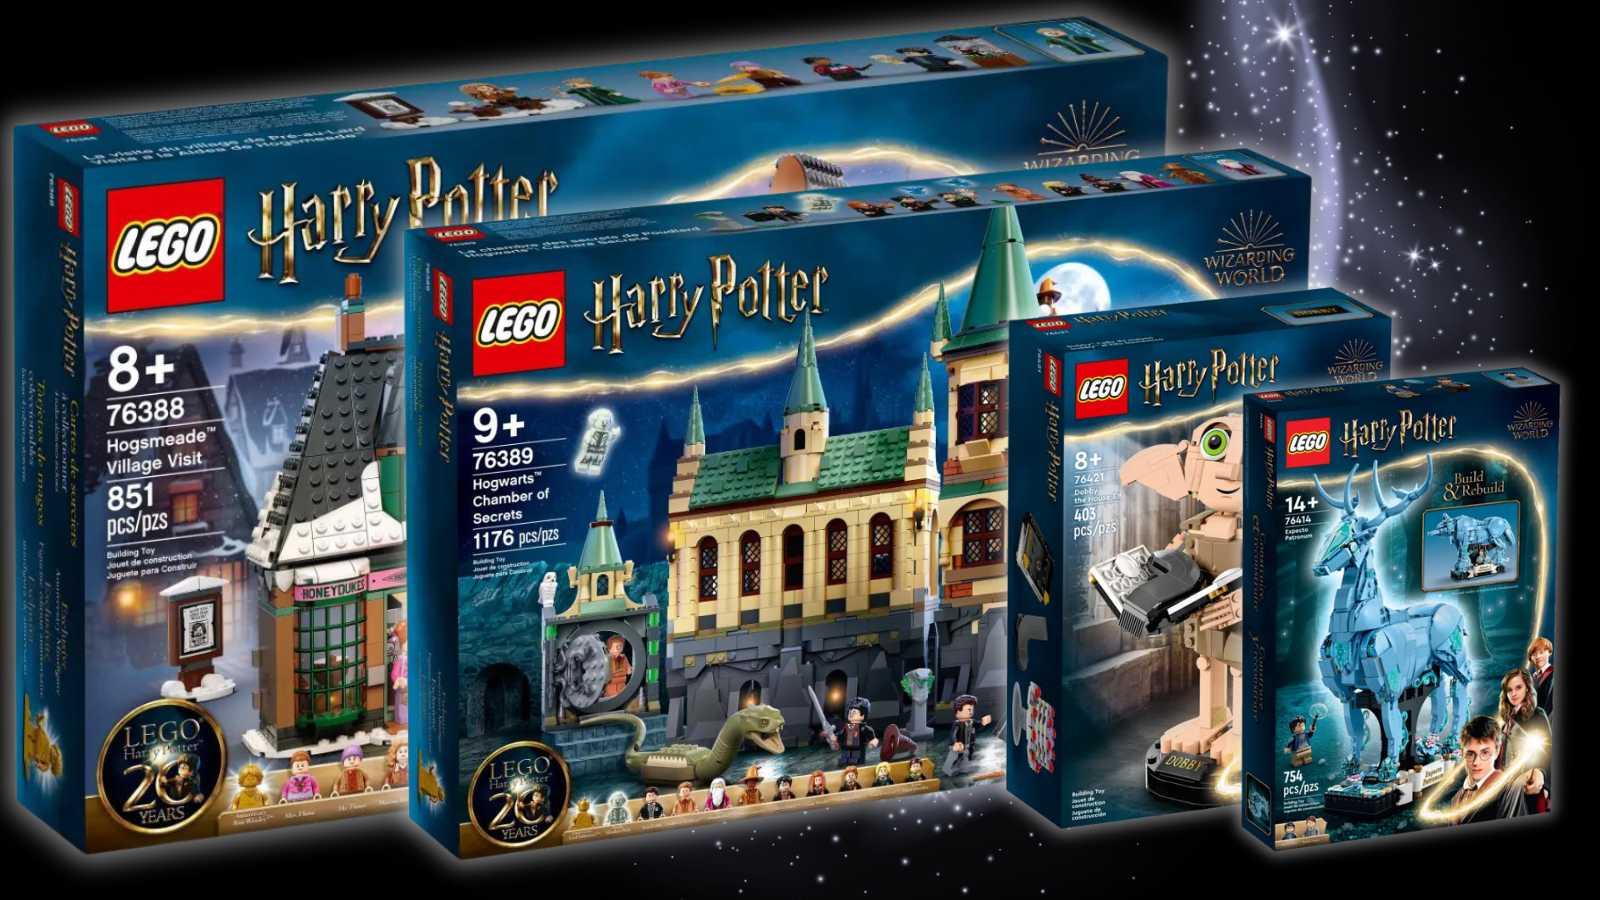 The LEGO Harry Potter sets discounted by Amazon on a black background with a magic graphic